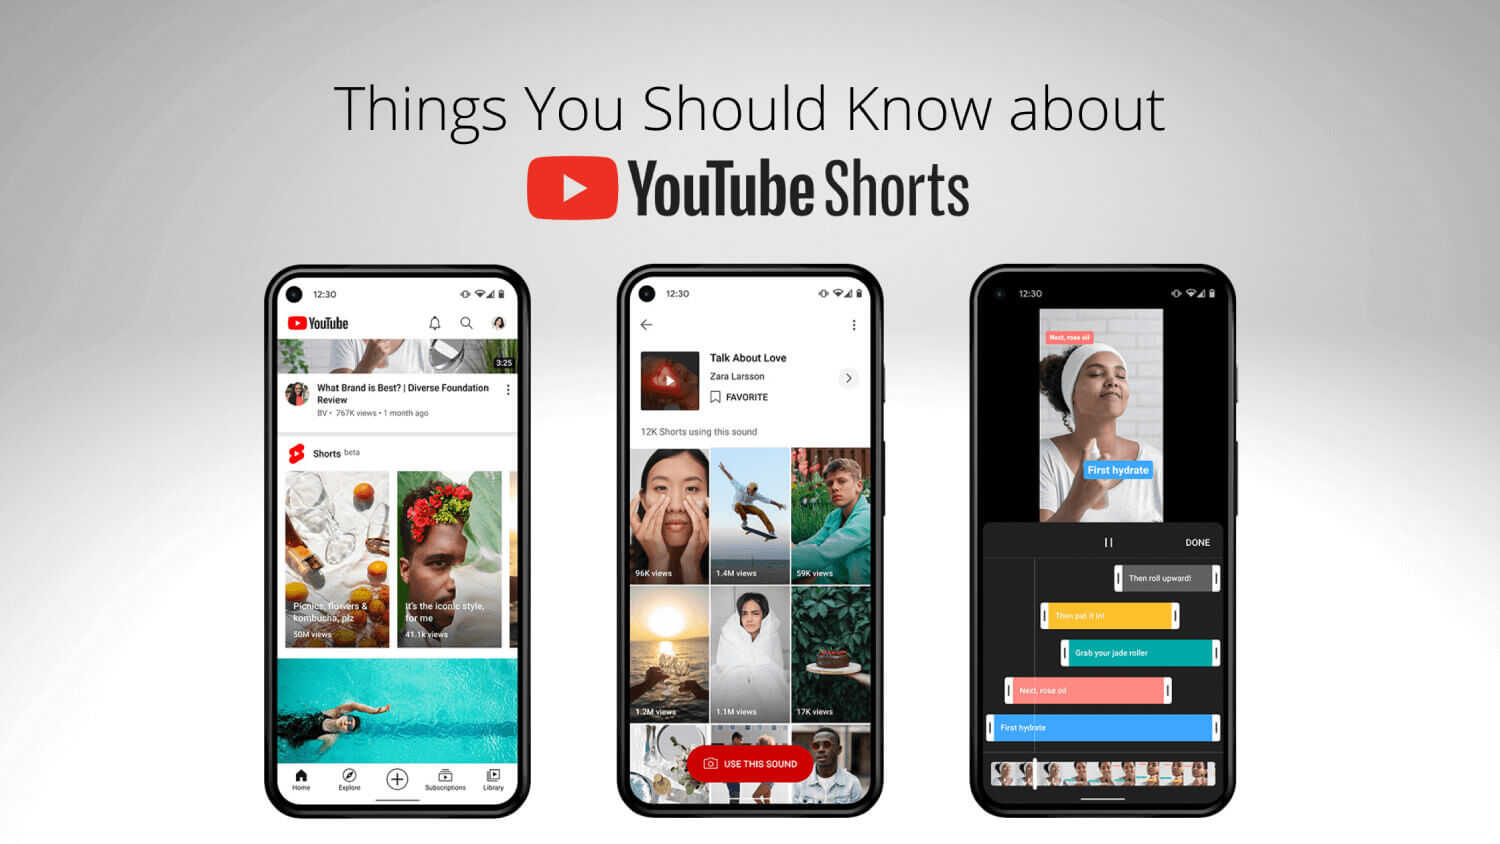 YouTube Shorts - Things You Should Know